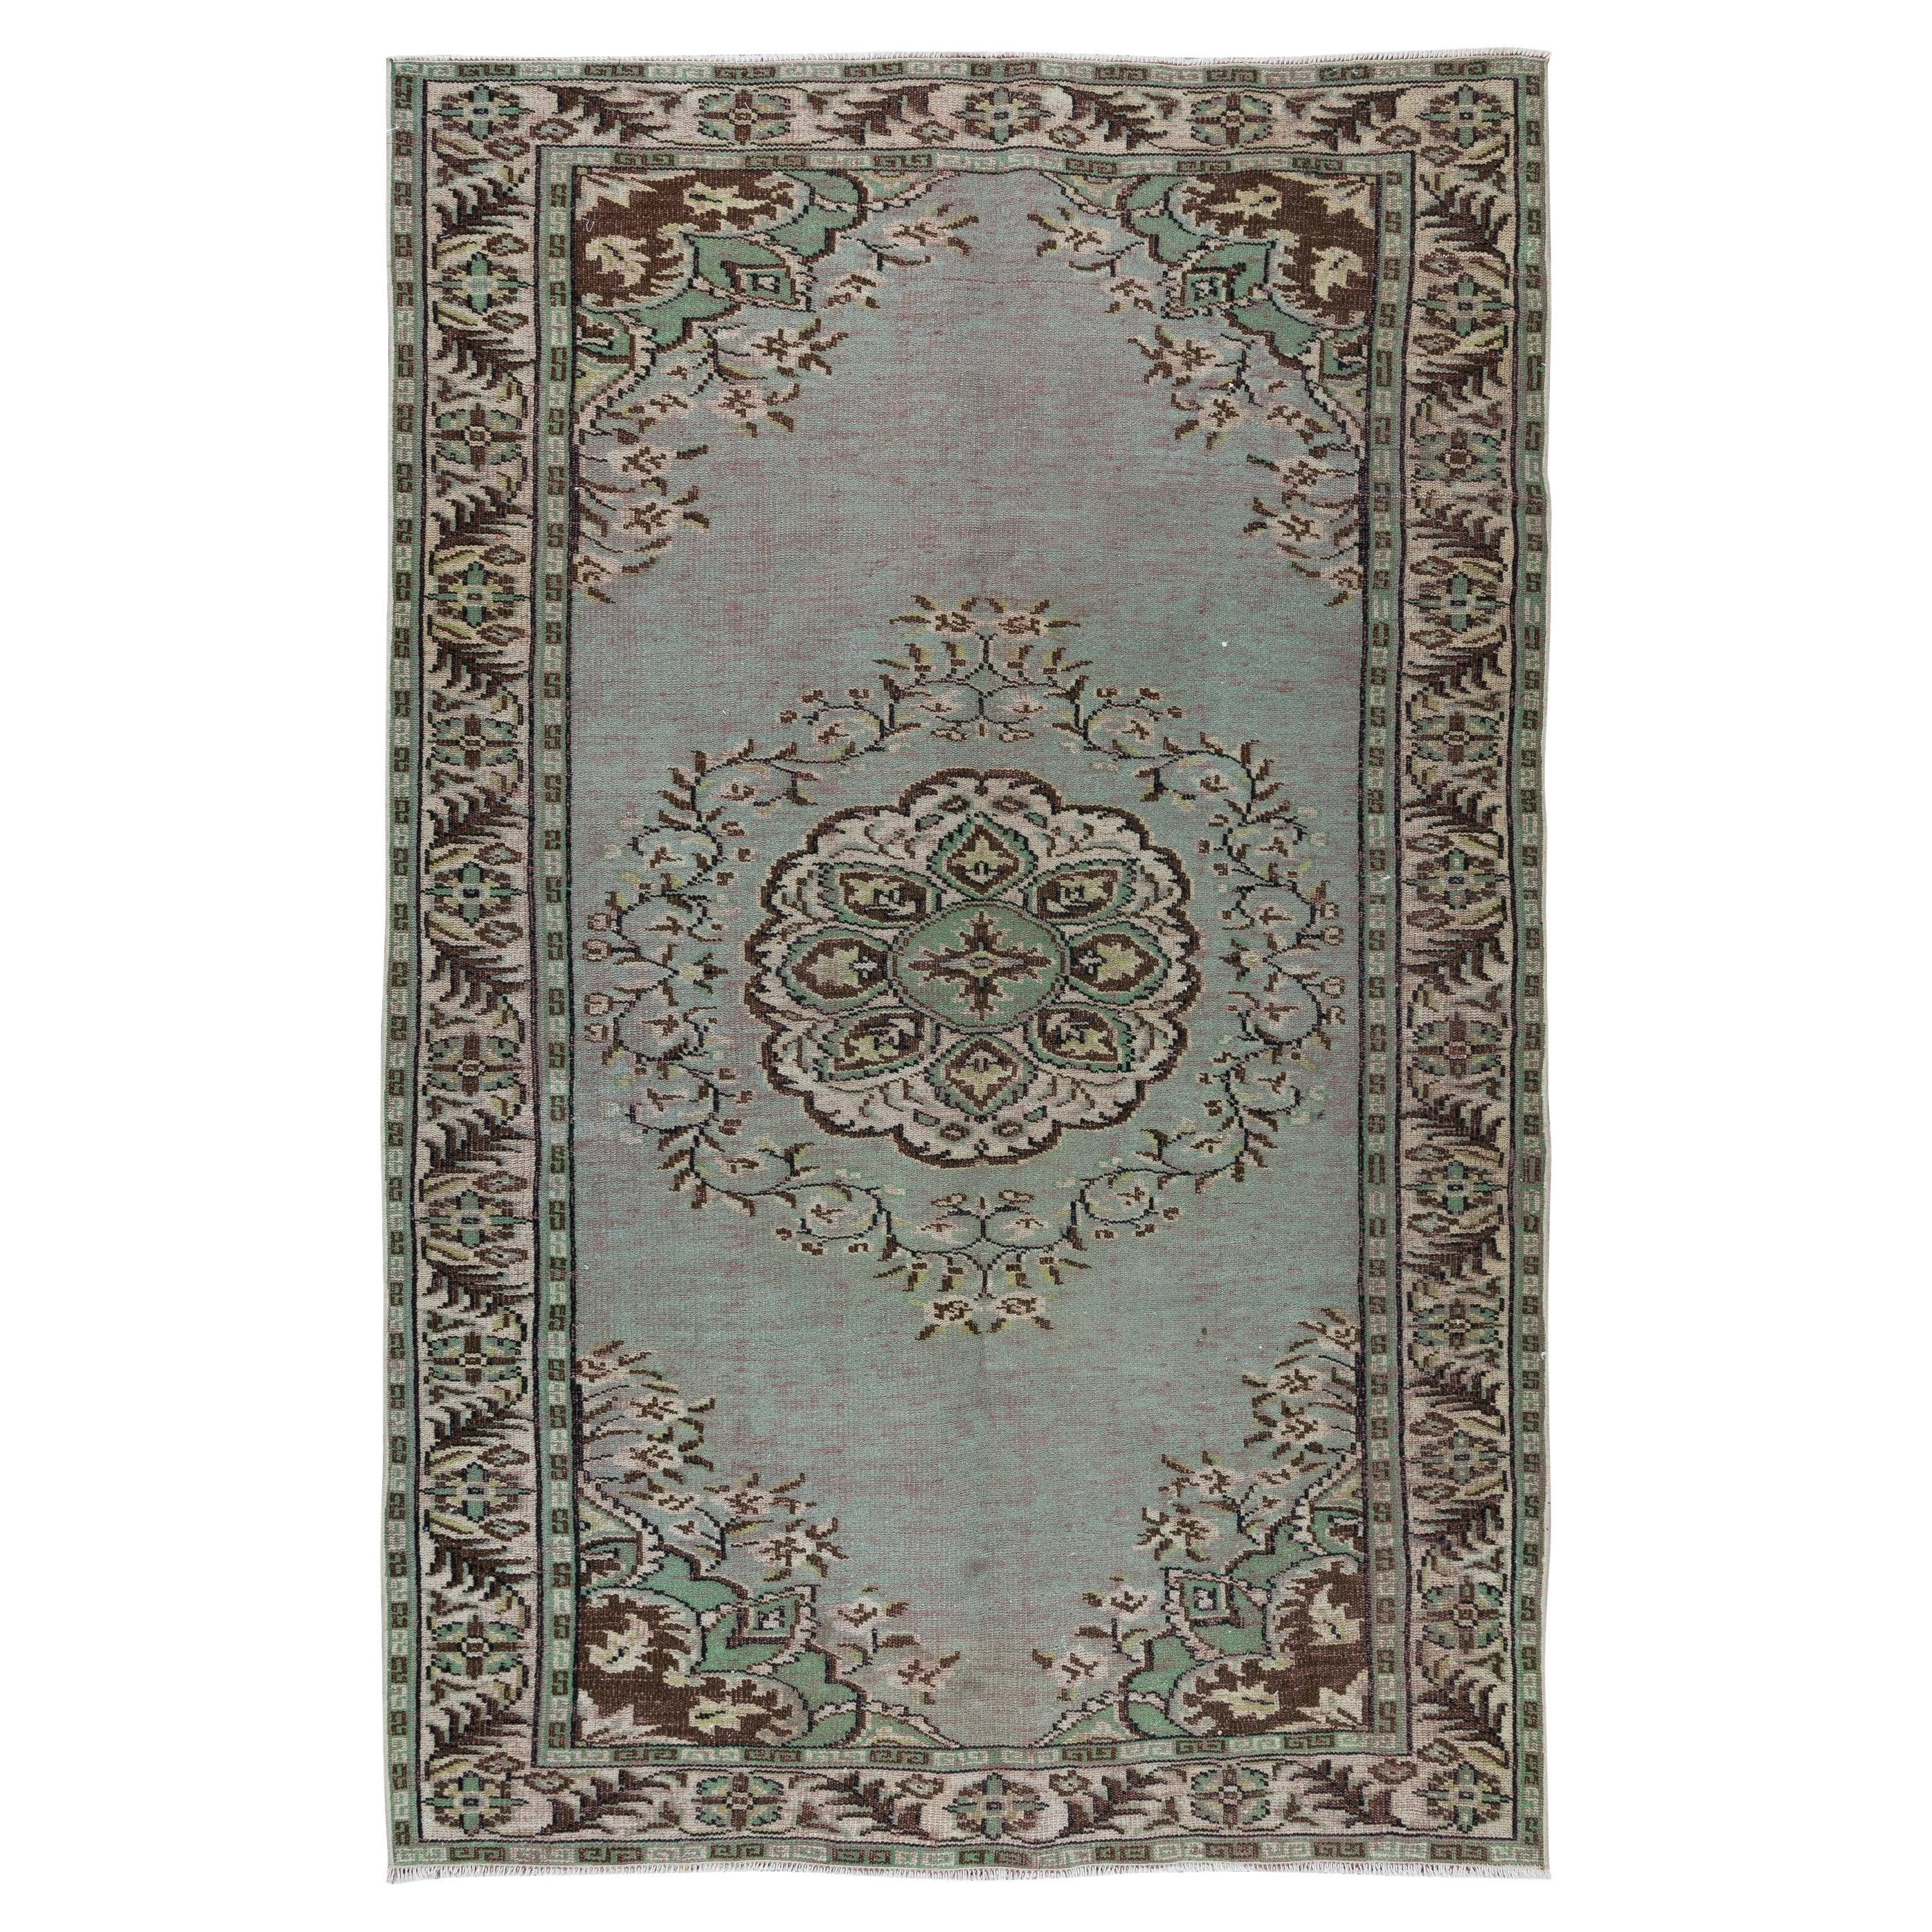 5.8x9 Ft Light Green Re-Dyed Turkish Hand Knotsted Rugs for Living Room (tapis turc teint à la main pour le salon)